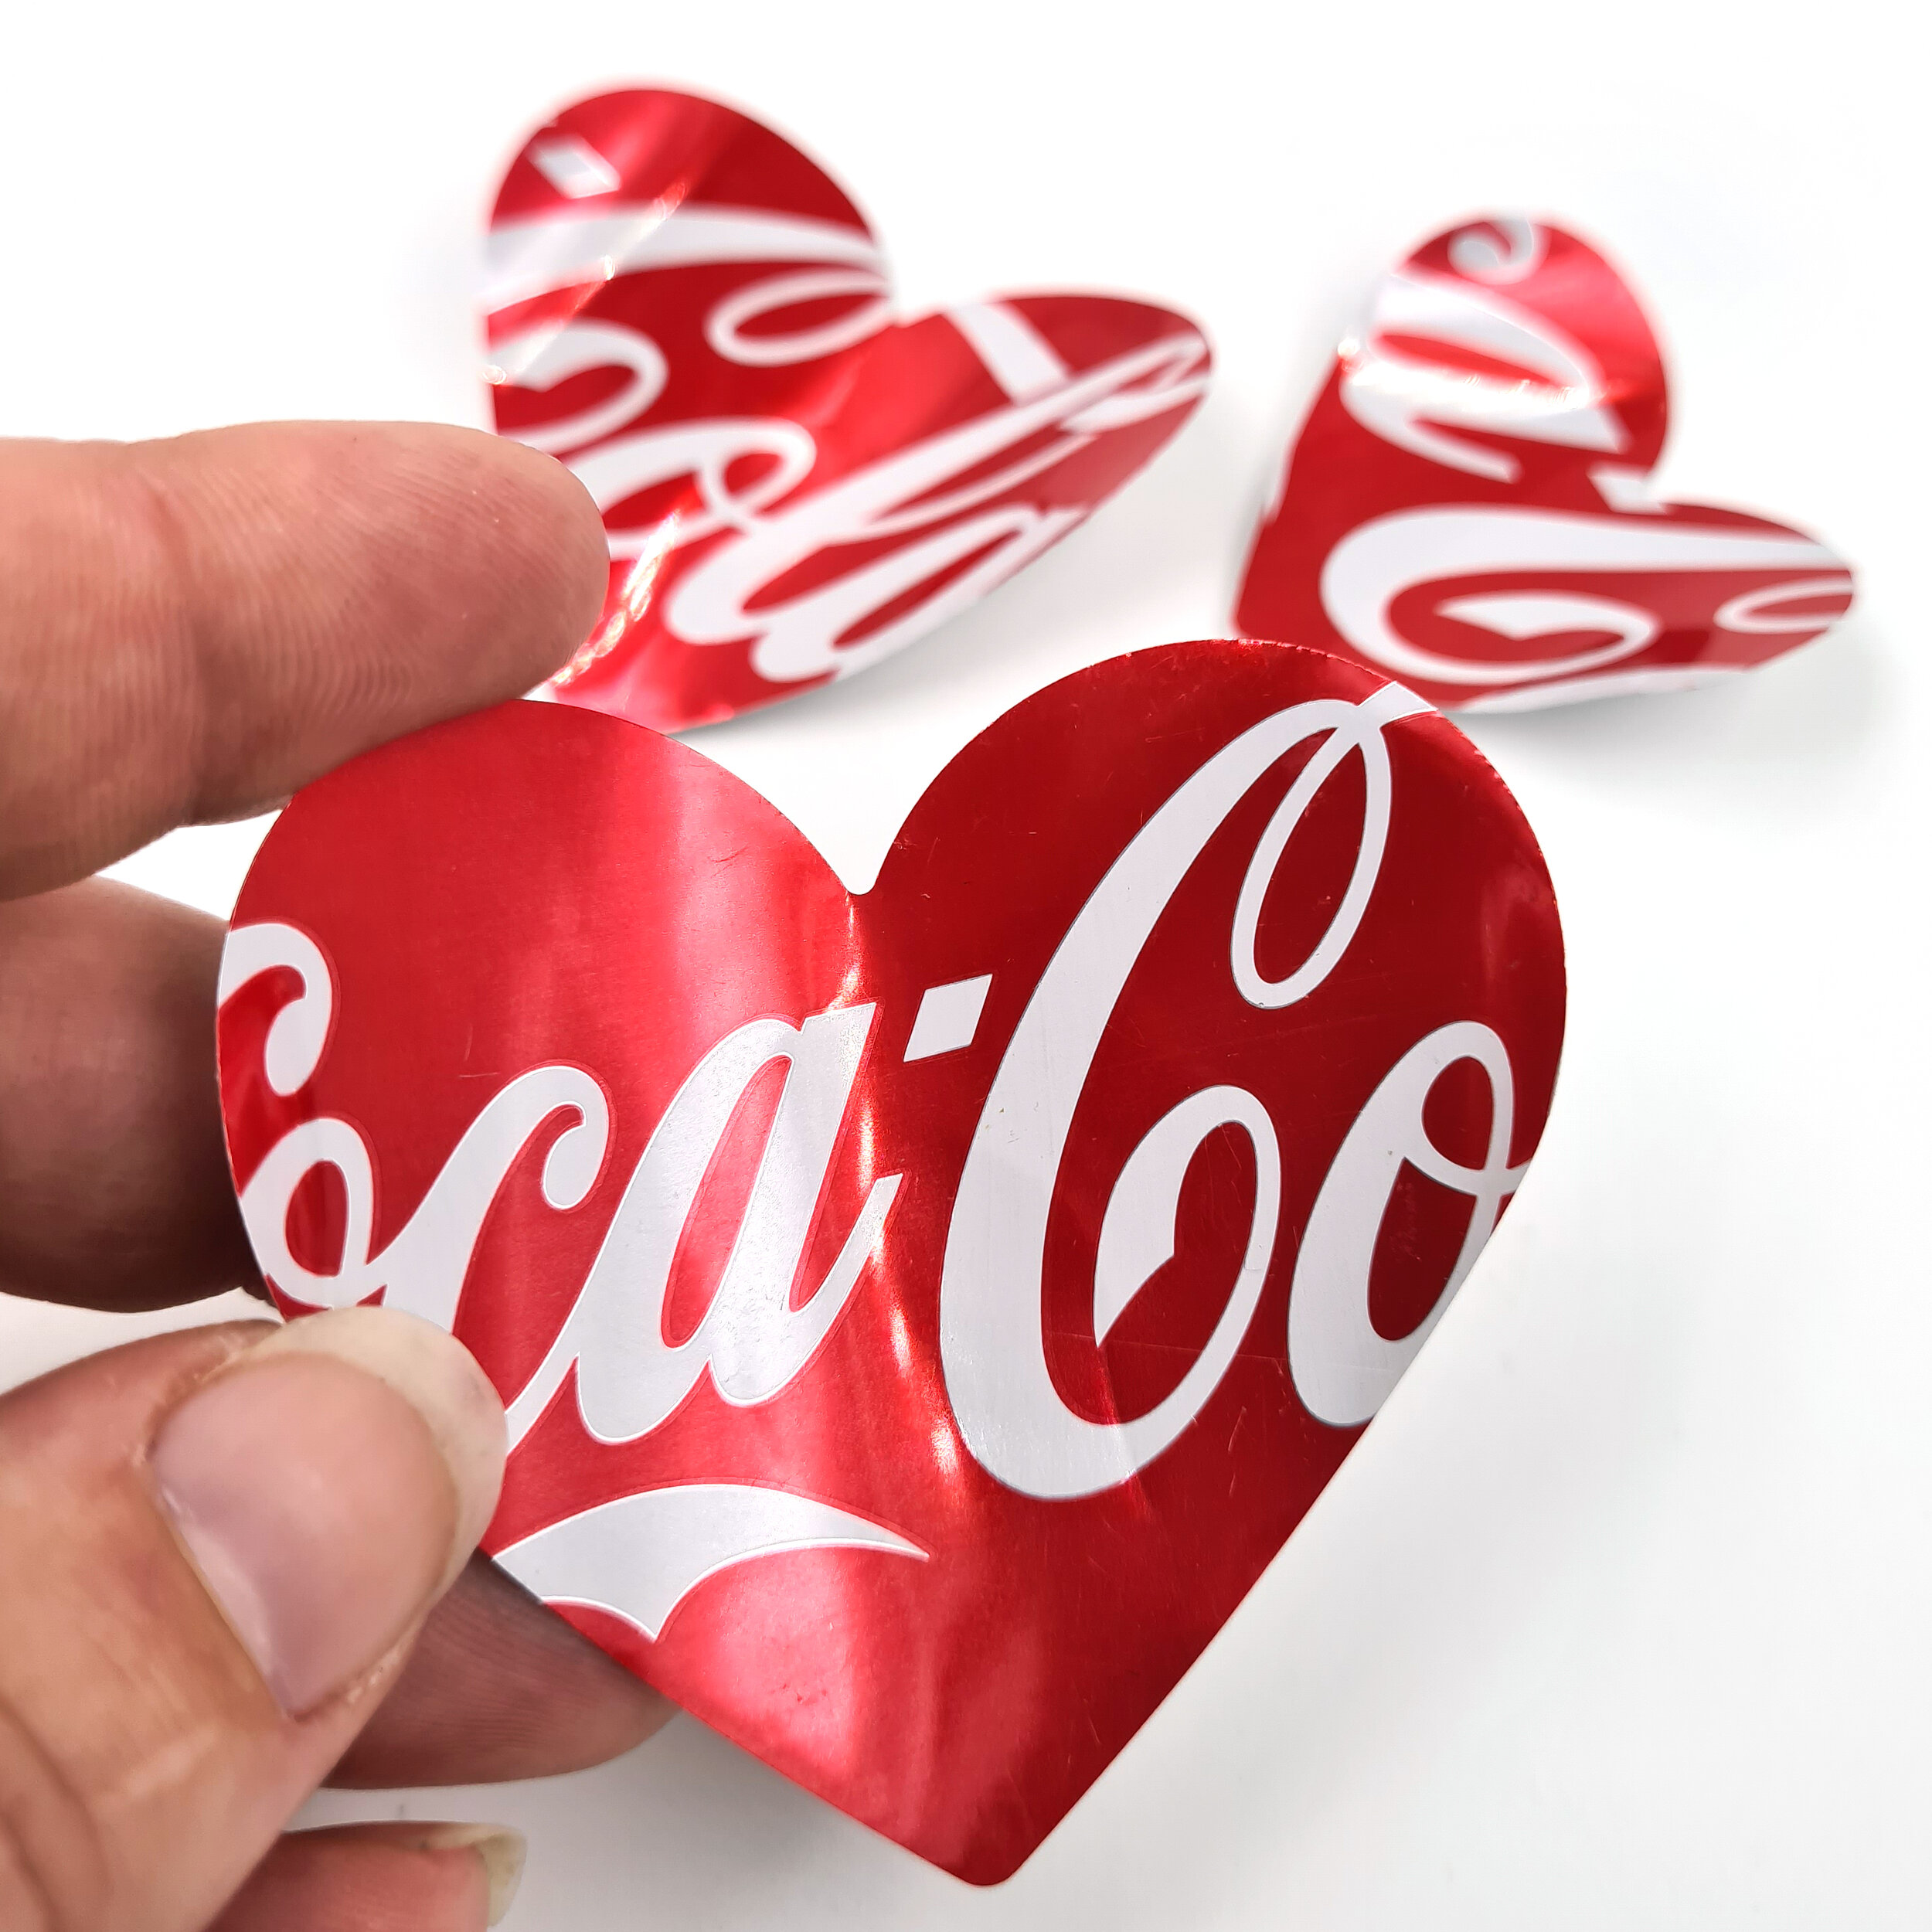 Coca-Cola Heart eco Can Magnets hand made in UK holding